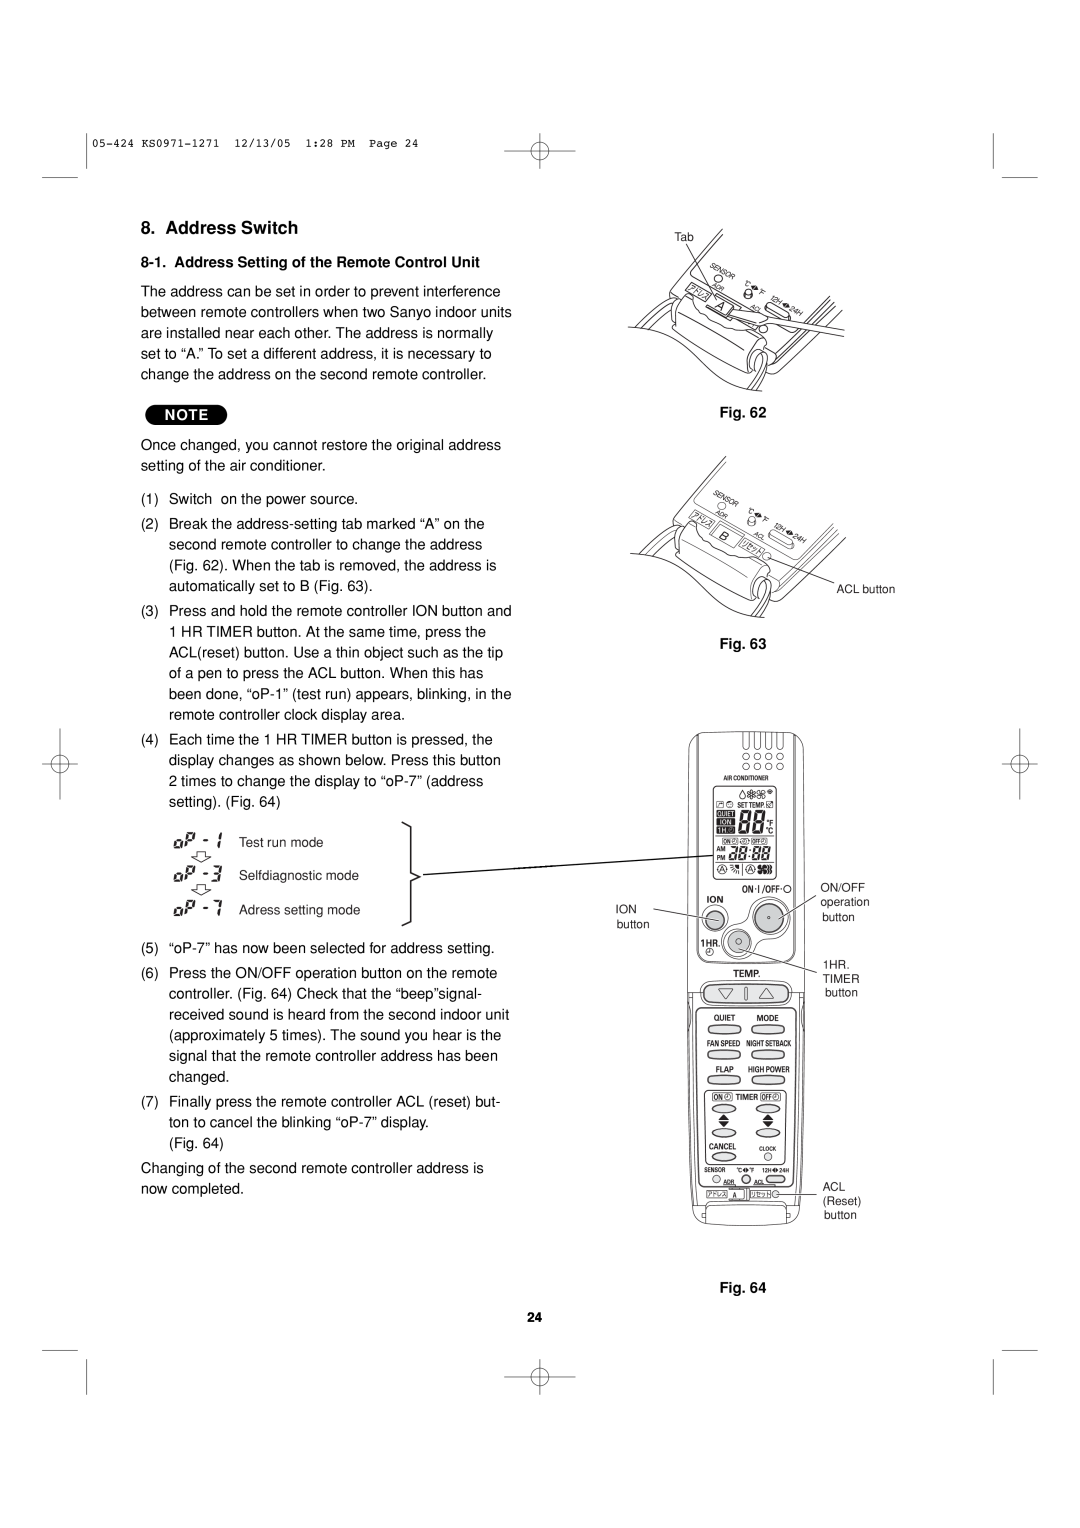 Sanyo Cool/Dry installation instructions Address Switch, Address Setting of the Remote Control Unit 